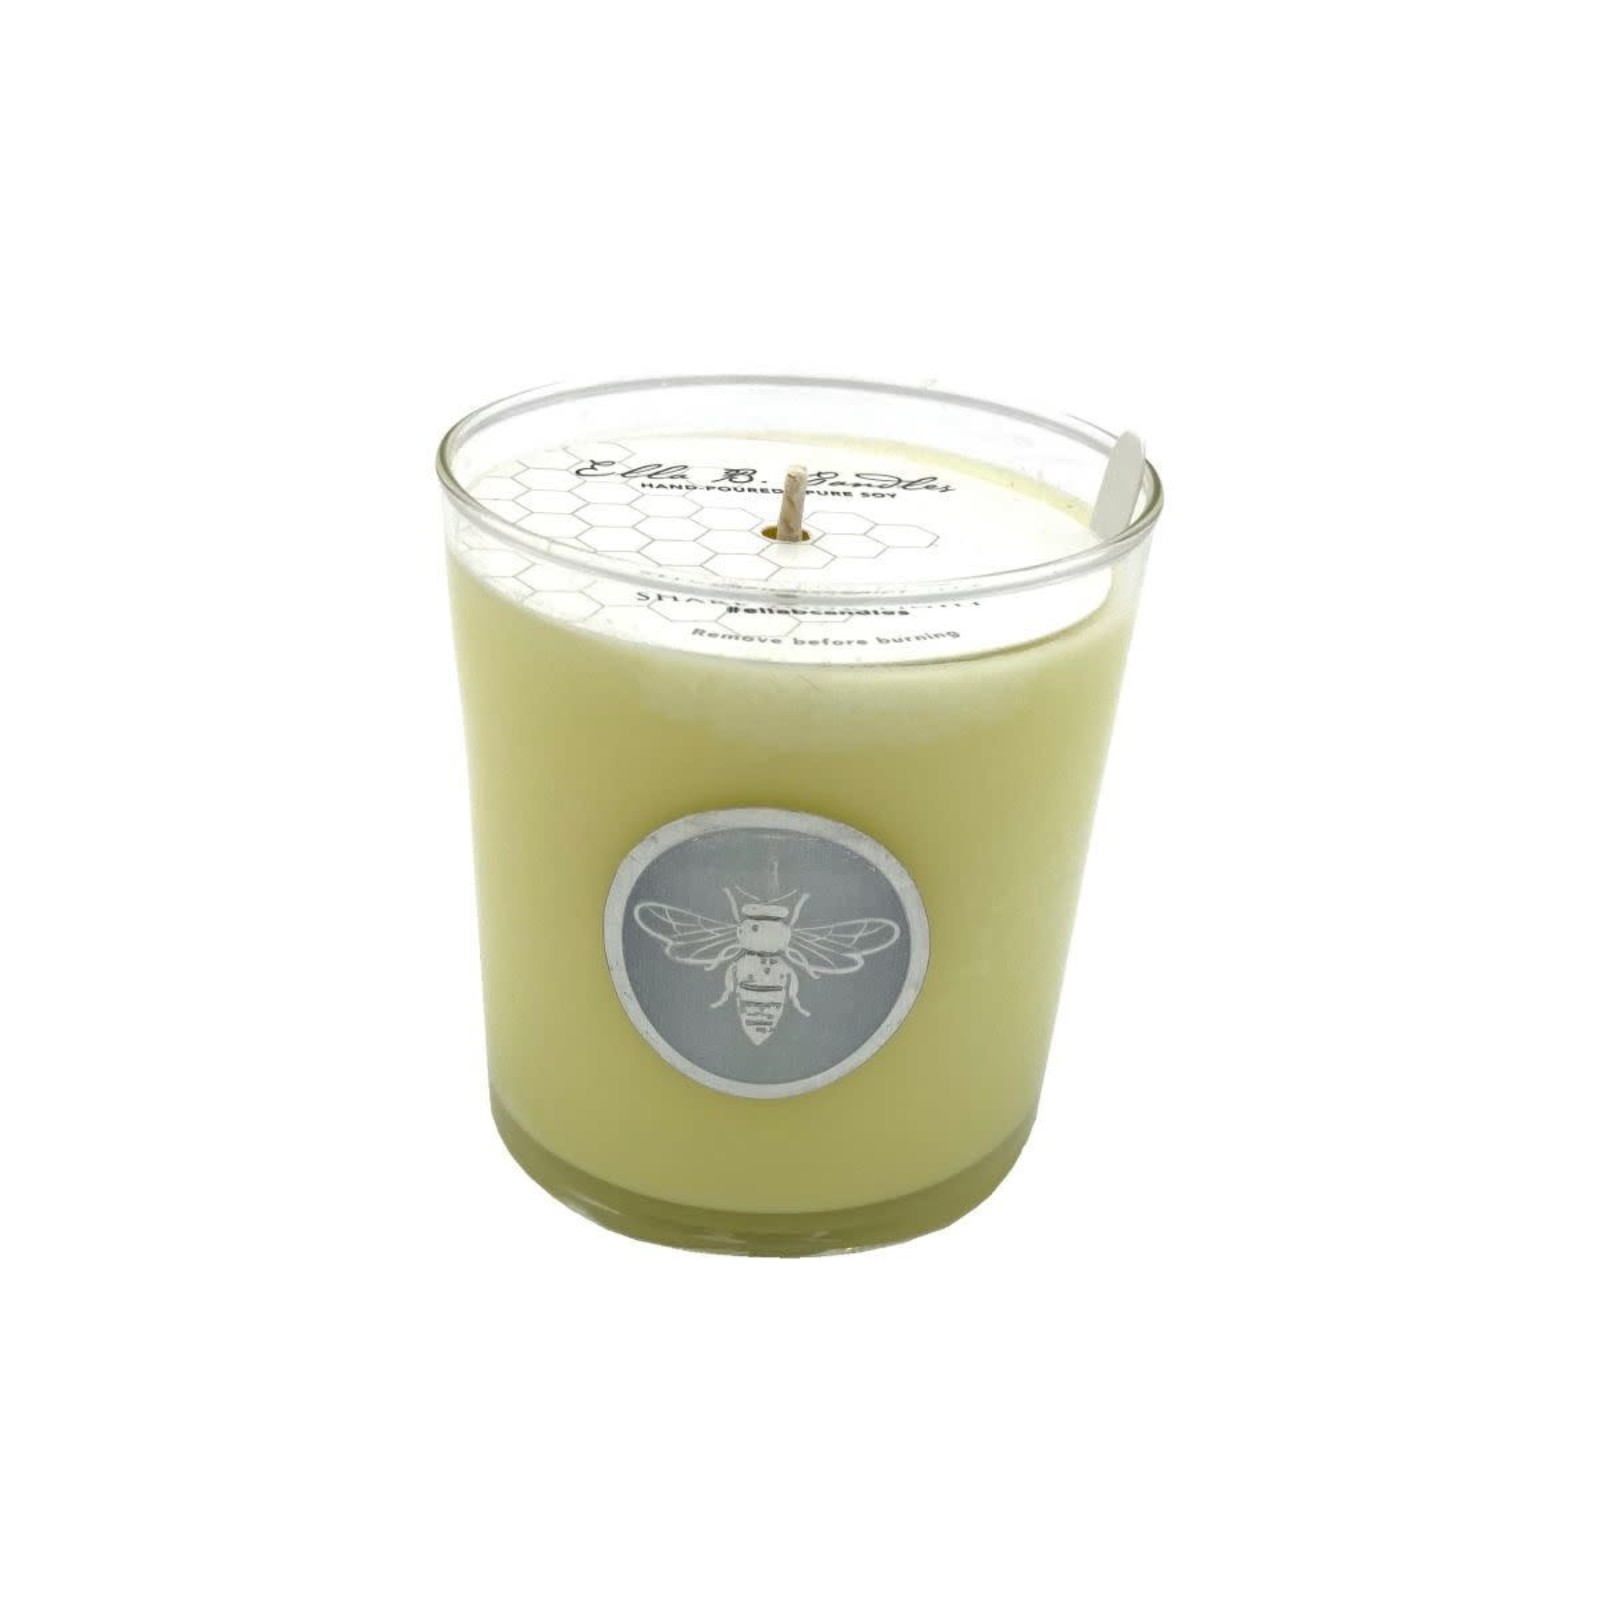 Ella B Candles Hand-Poured Soy Candle-Japanese Garden loading=